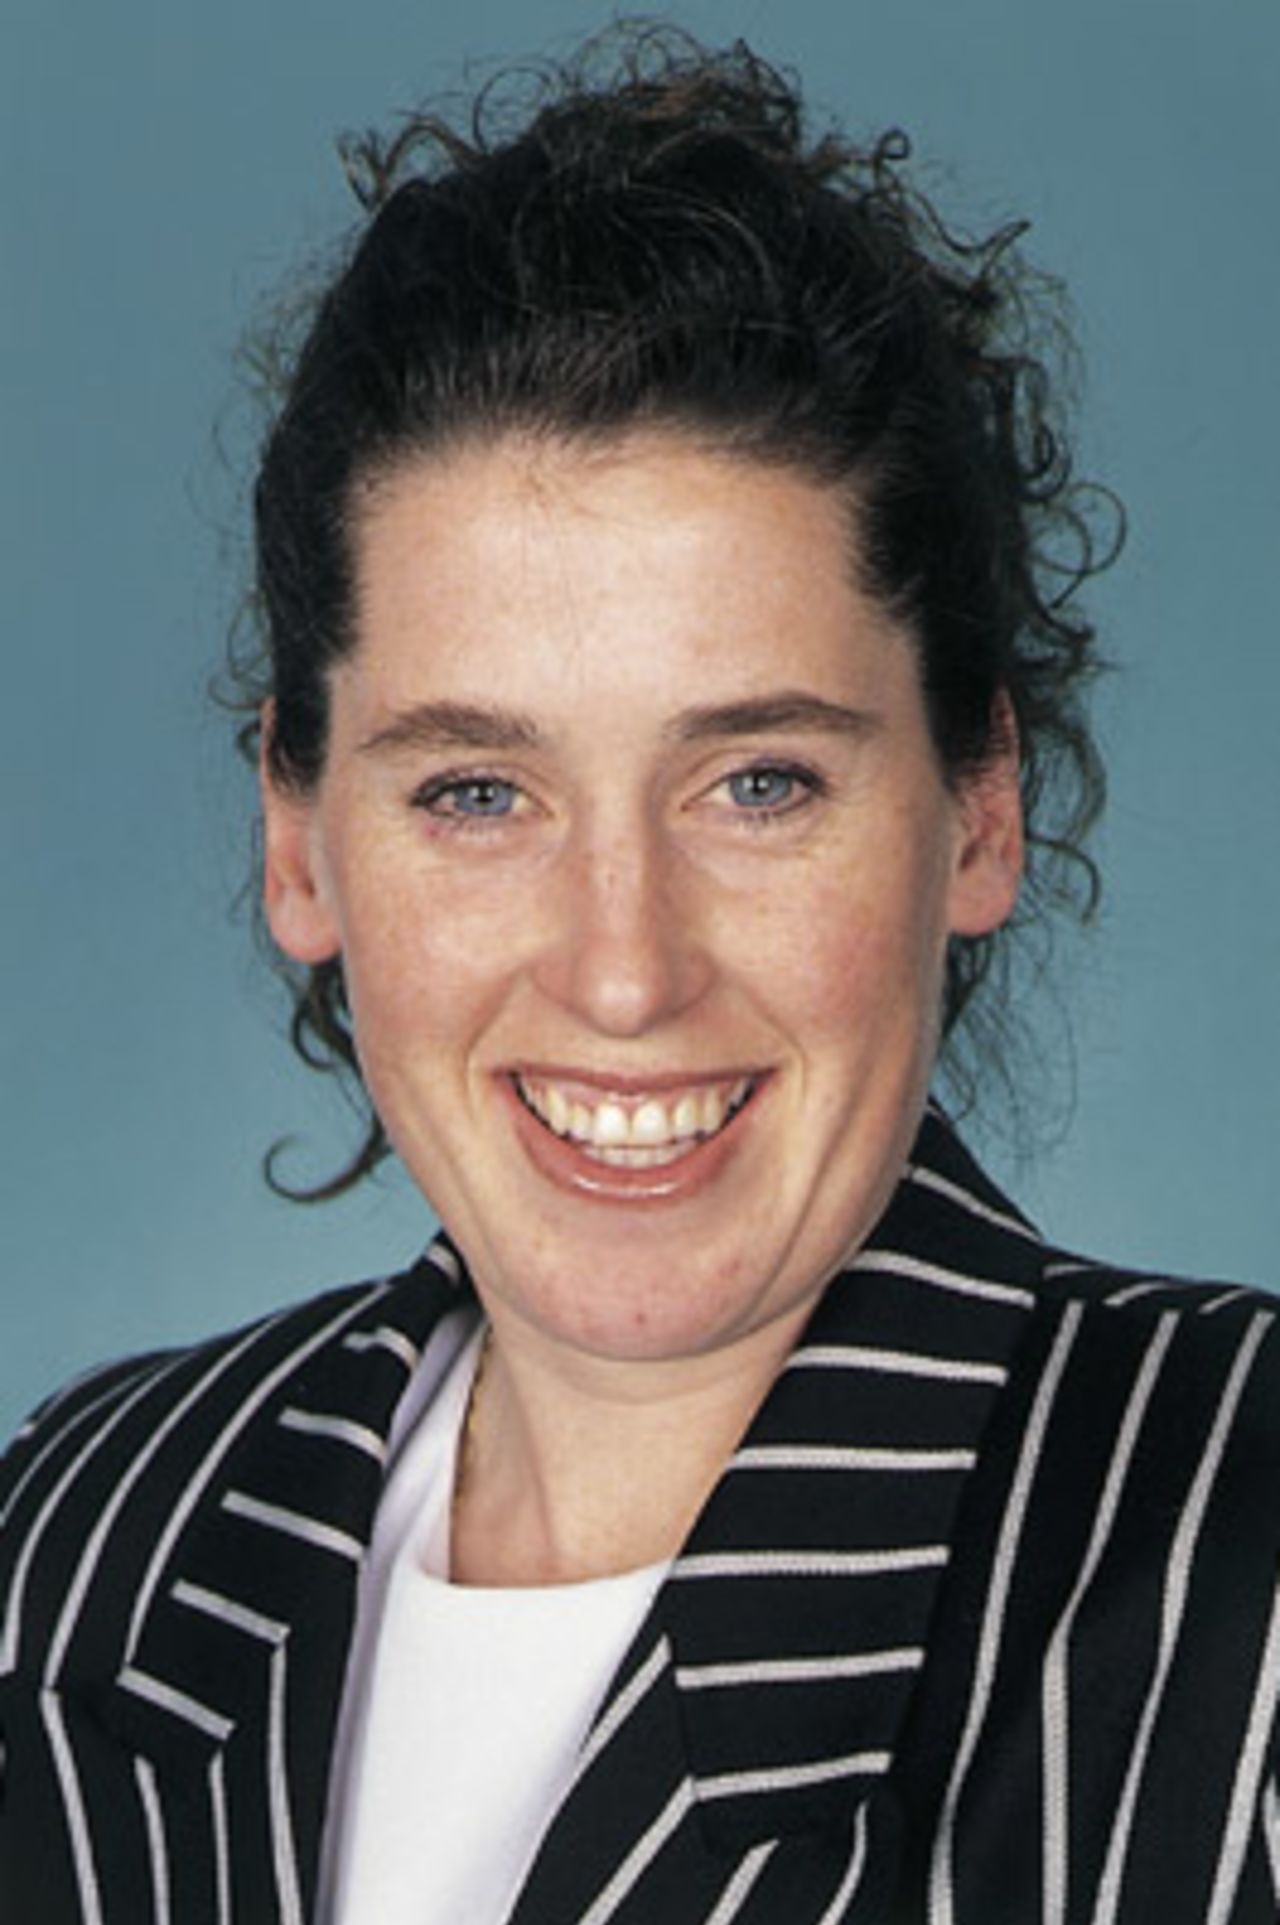 Portrait of Helen Watson, at Lincoln, July 2000 - New Zealand training squad member for the CricInfo Women's World Cup 2000